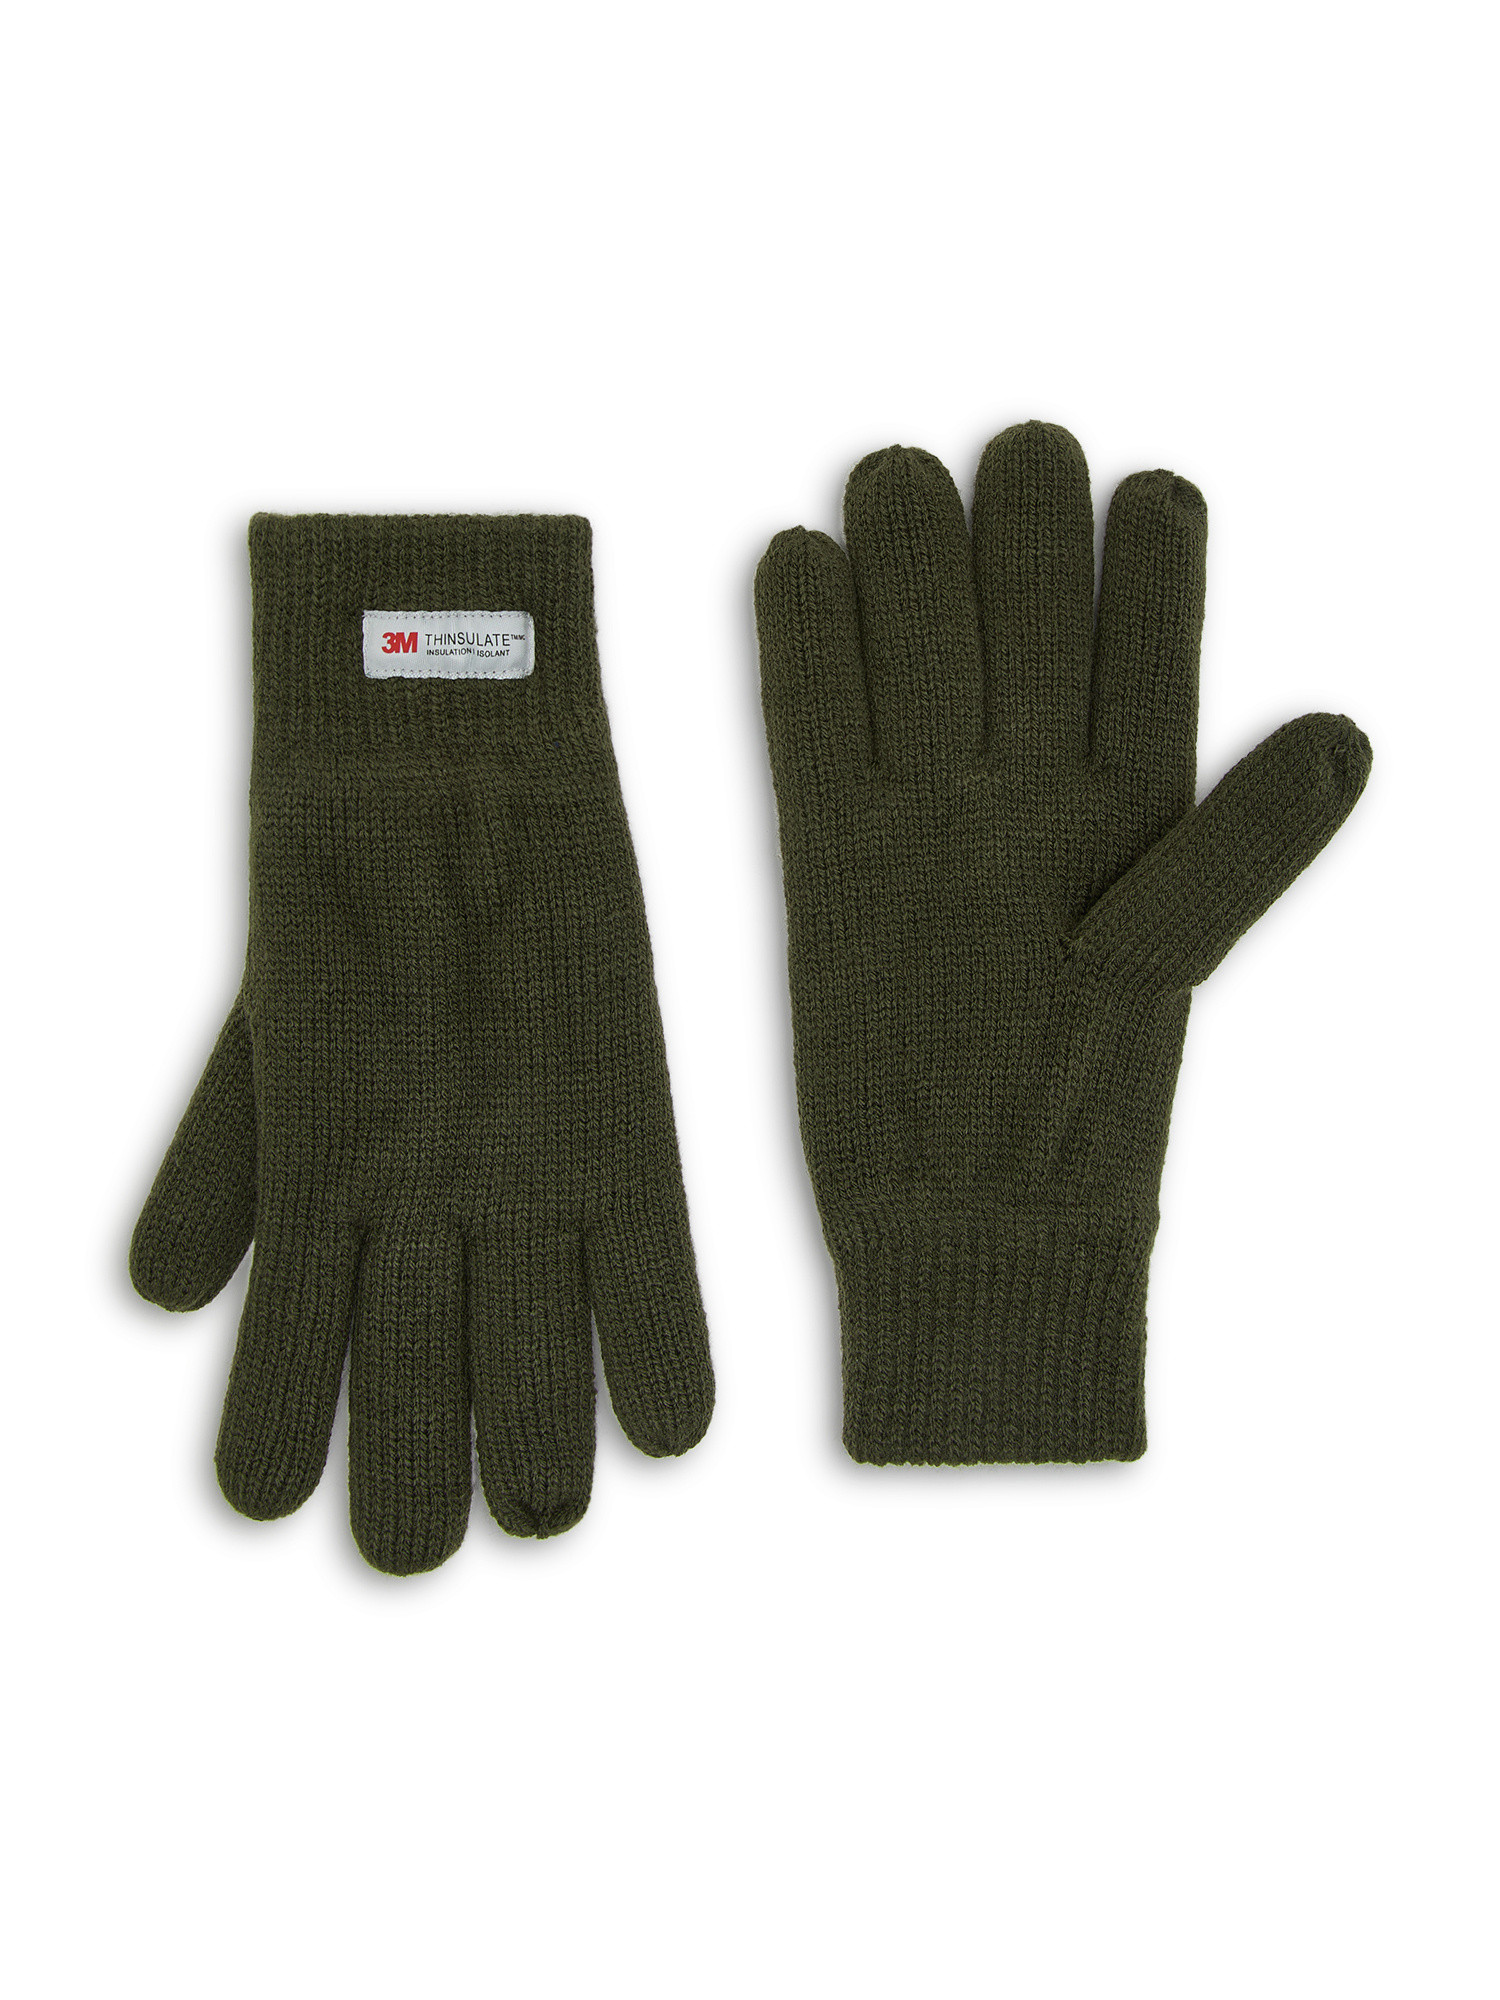 Luca D'Altieri - Knitted gloves, Olive Green, large image number 0